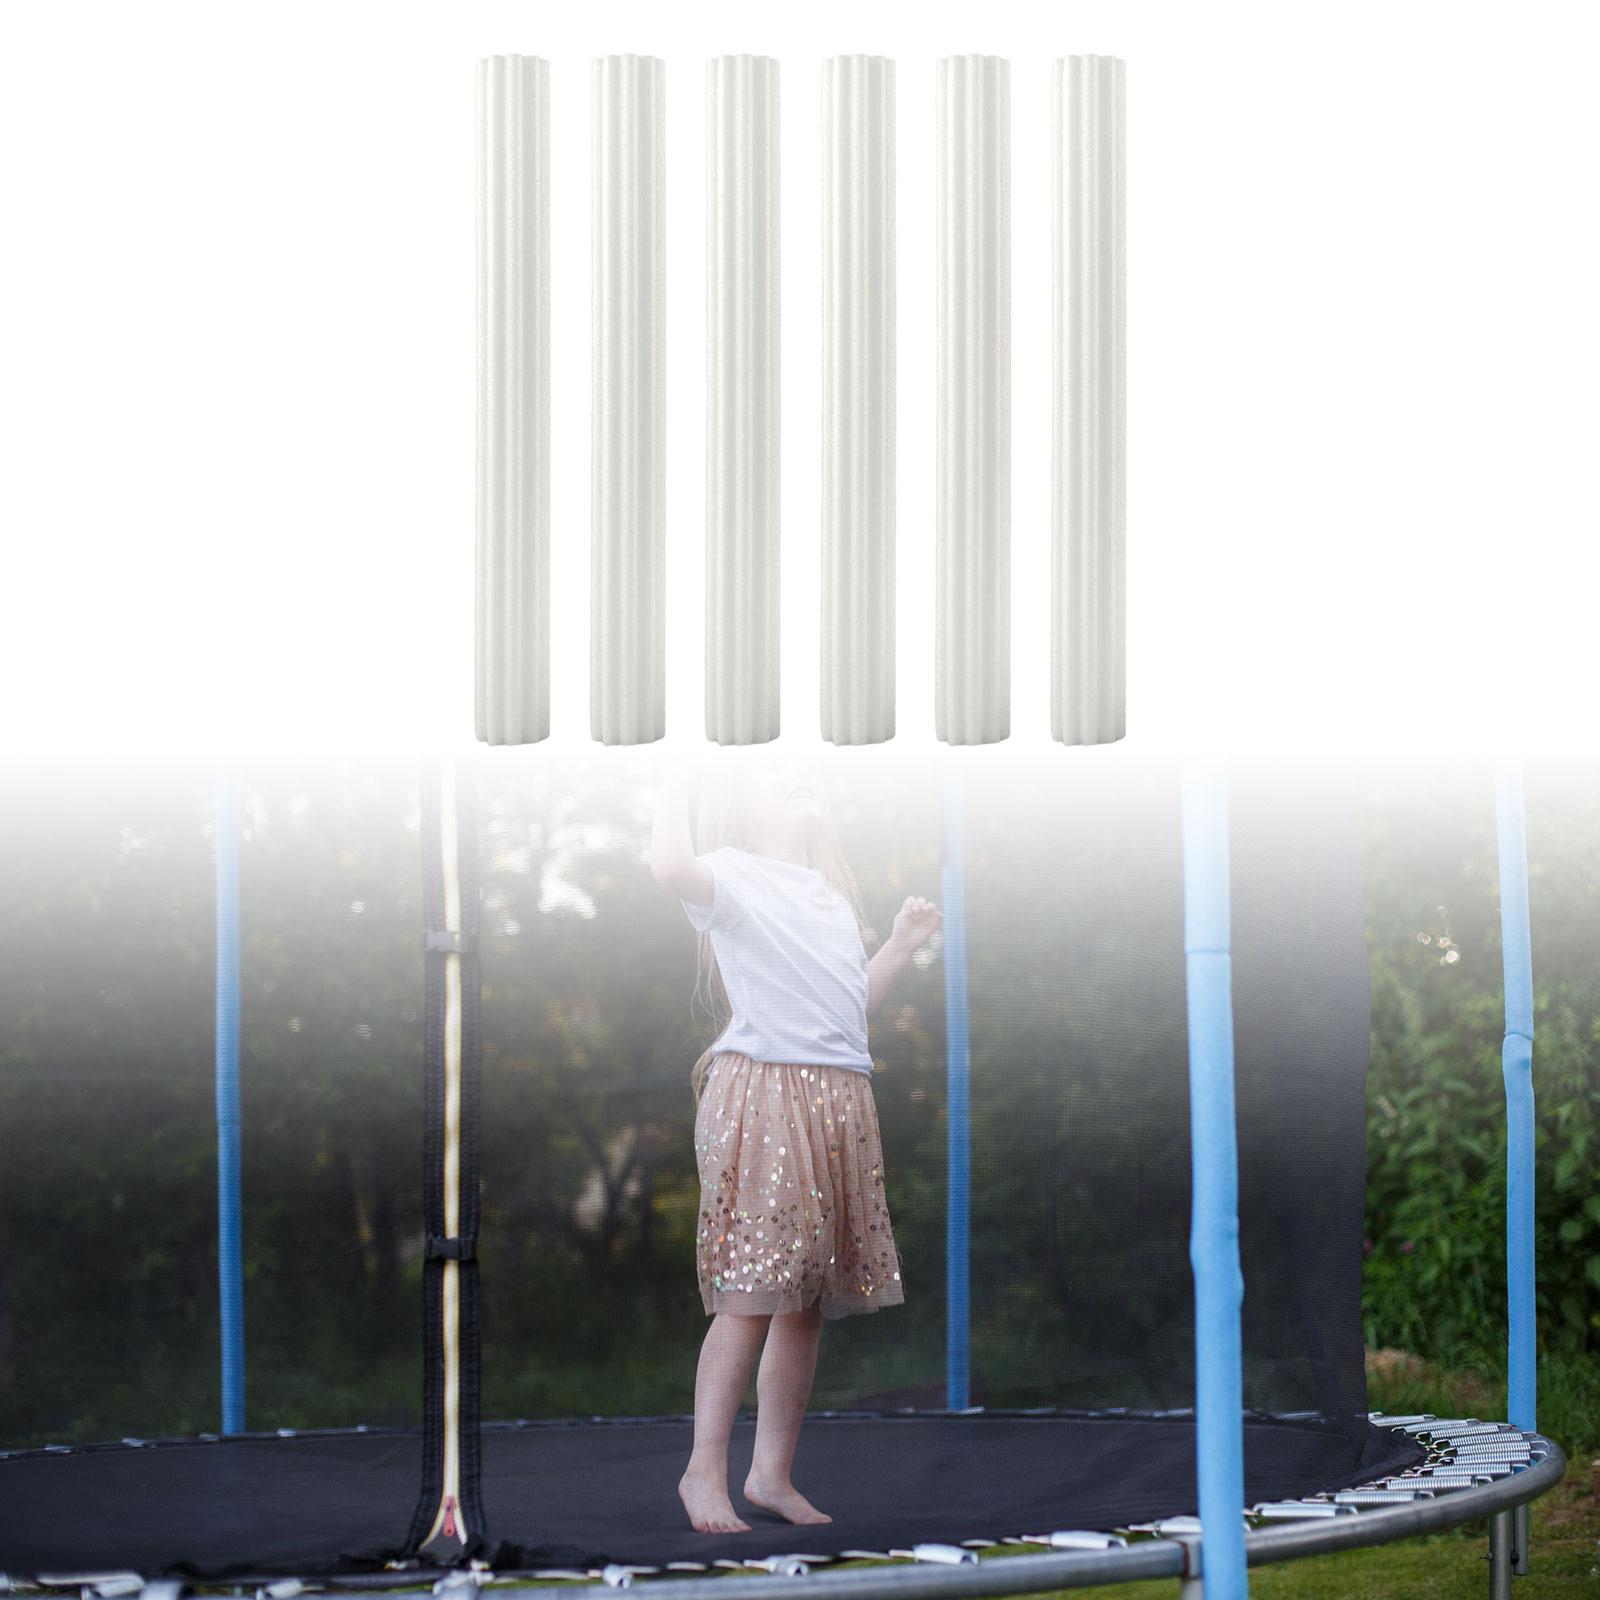 Trampoline Pole Foam Sleeves Padding for Pipe Outdoor Trampoline Accessories 6pcs